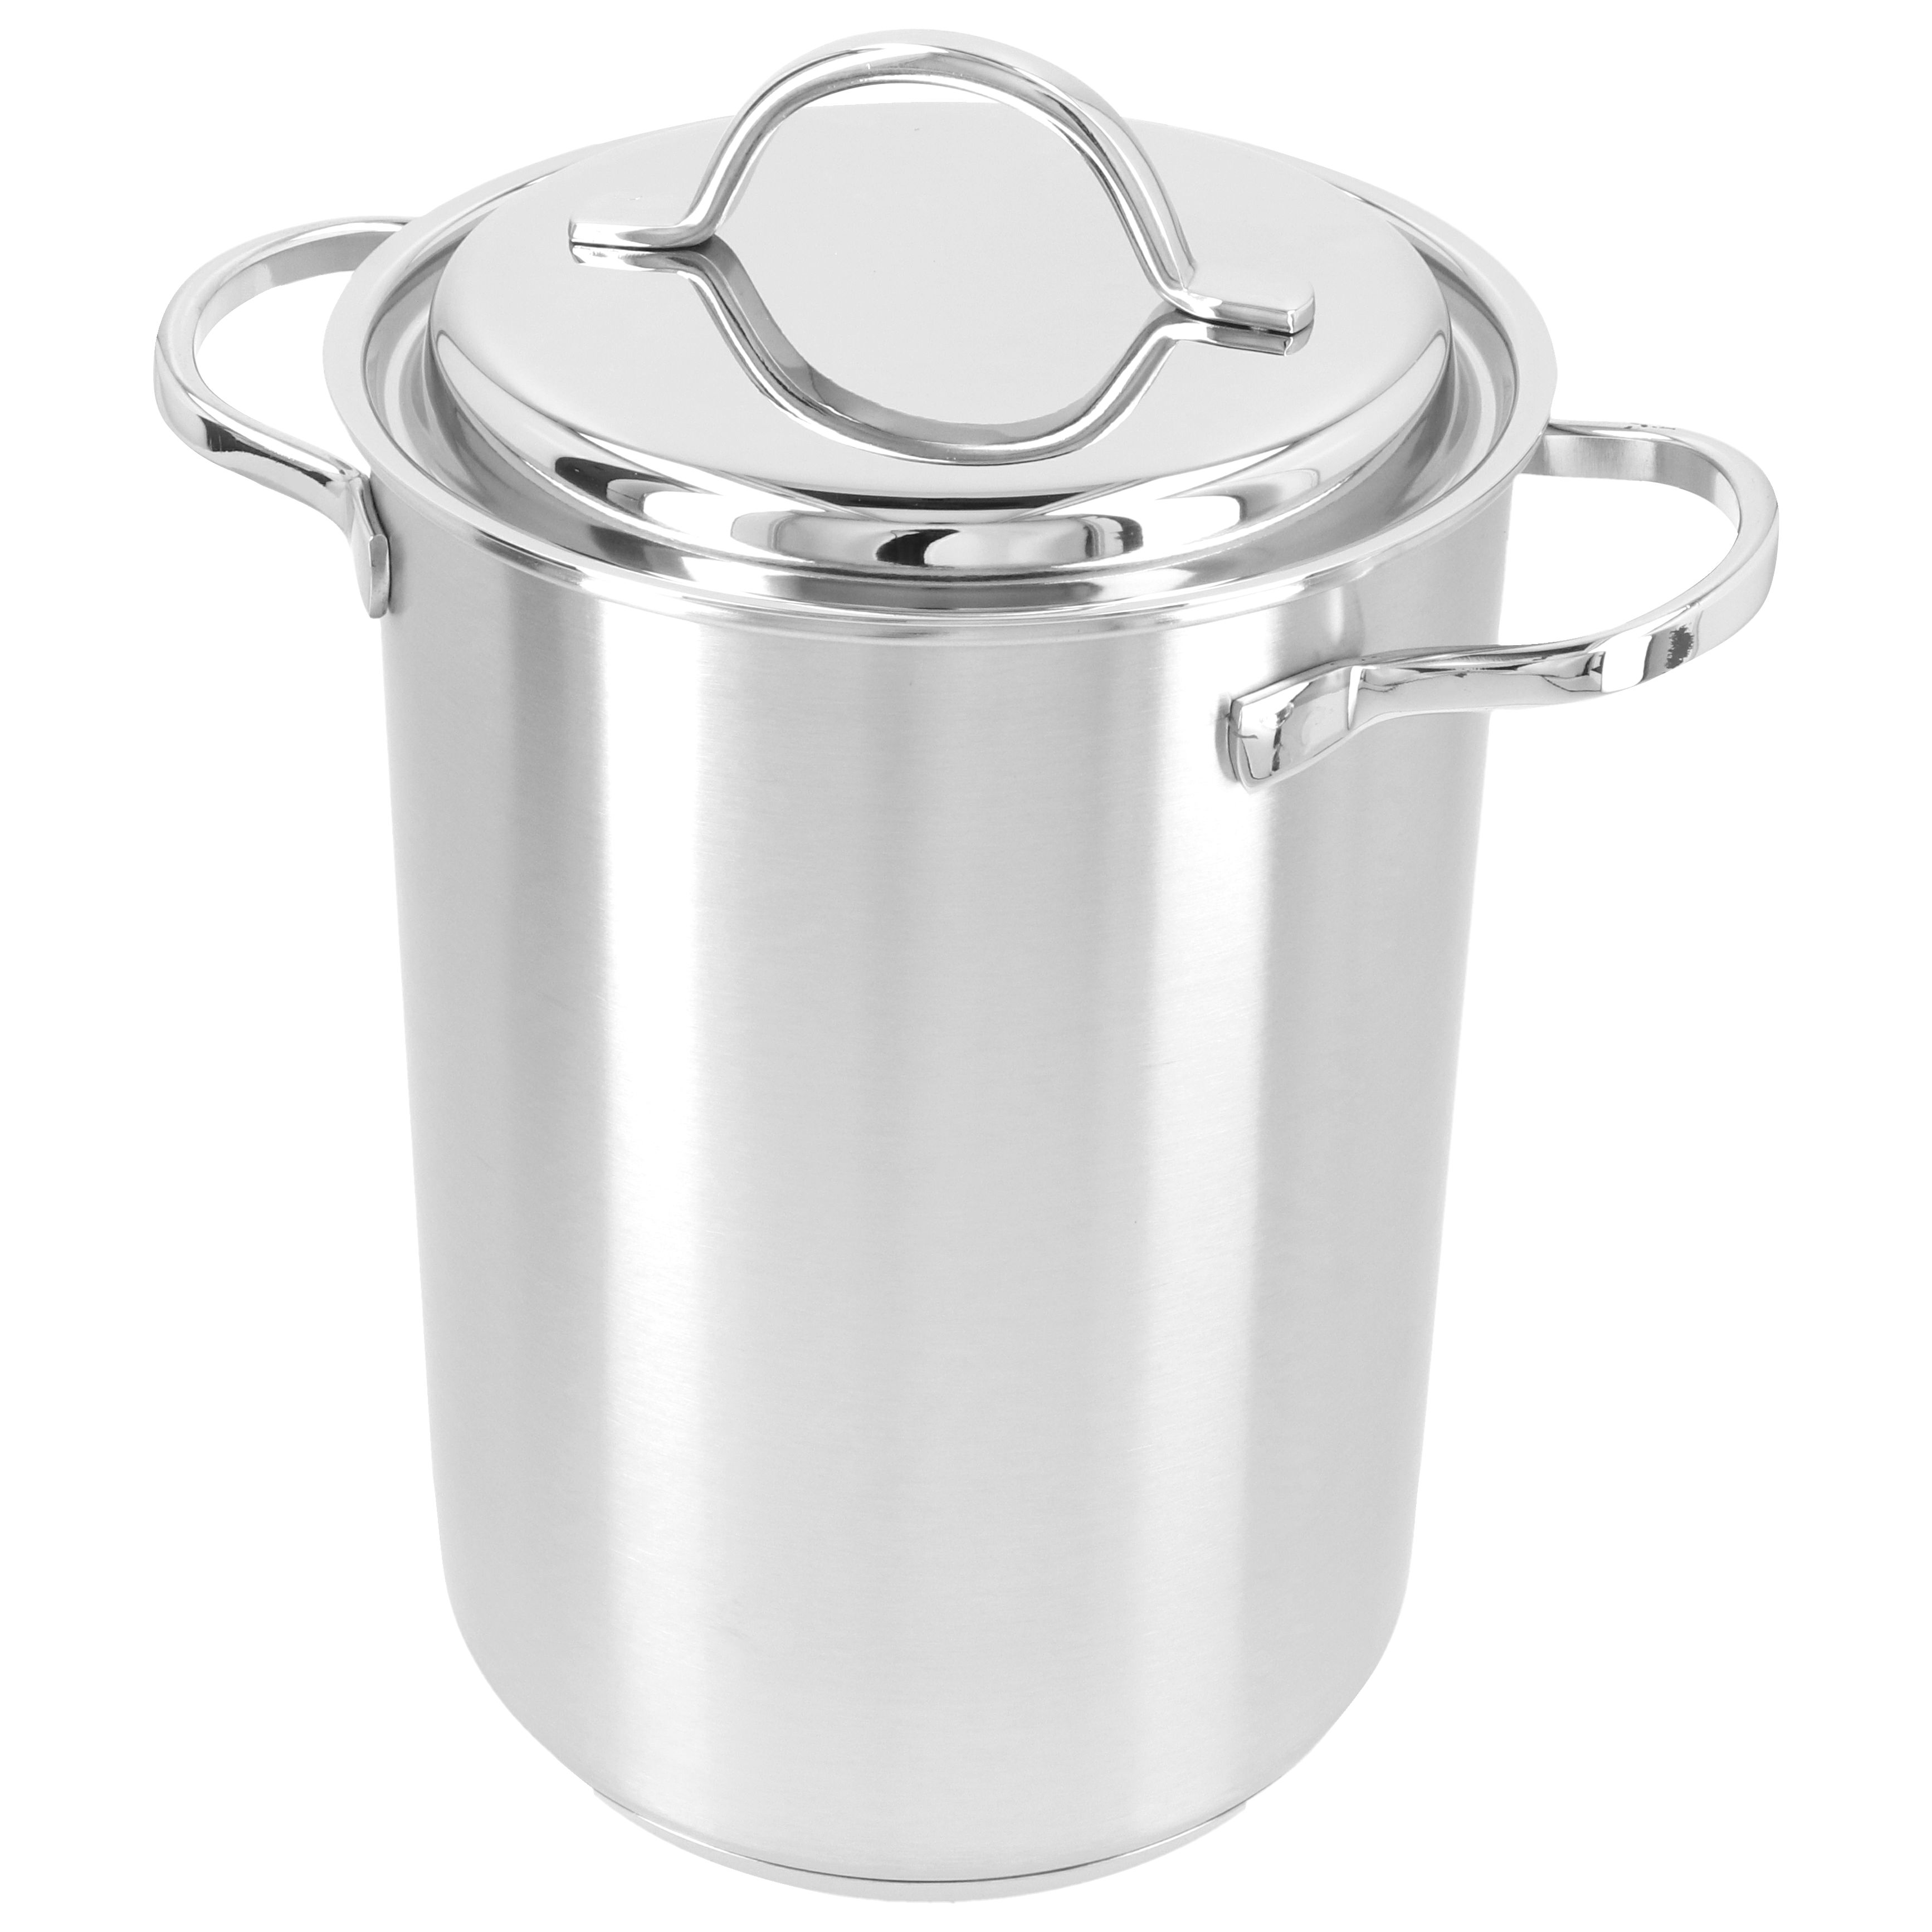 All-Clad Stainless Steel Asparagus/Veggie Steamer Pot~Basket and Lid -  household items - by owner - housewares sale 